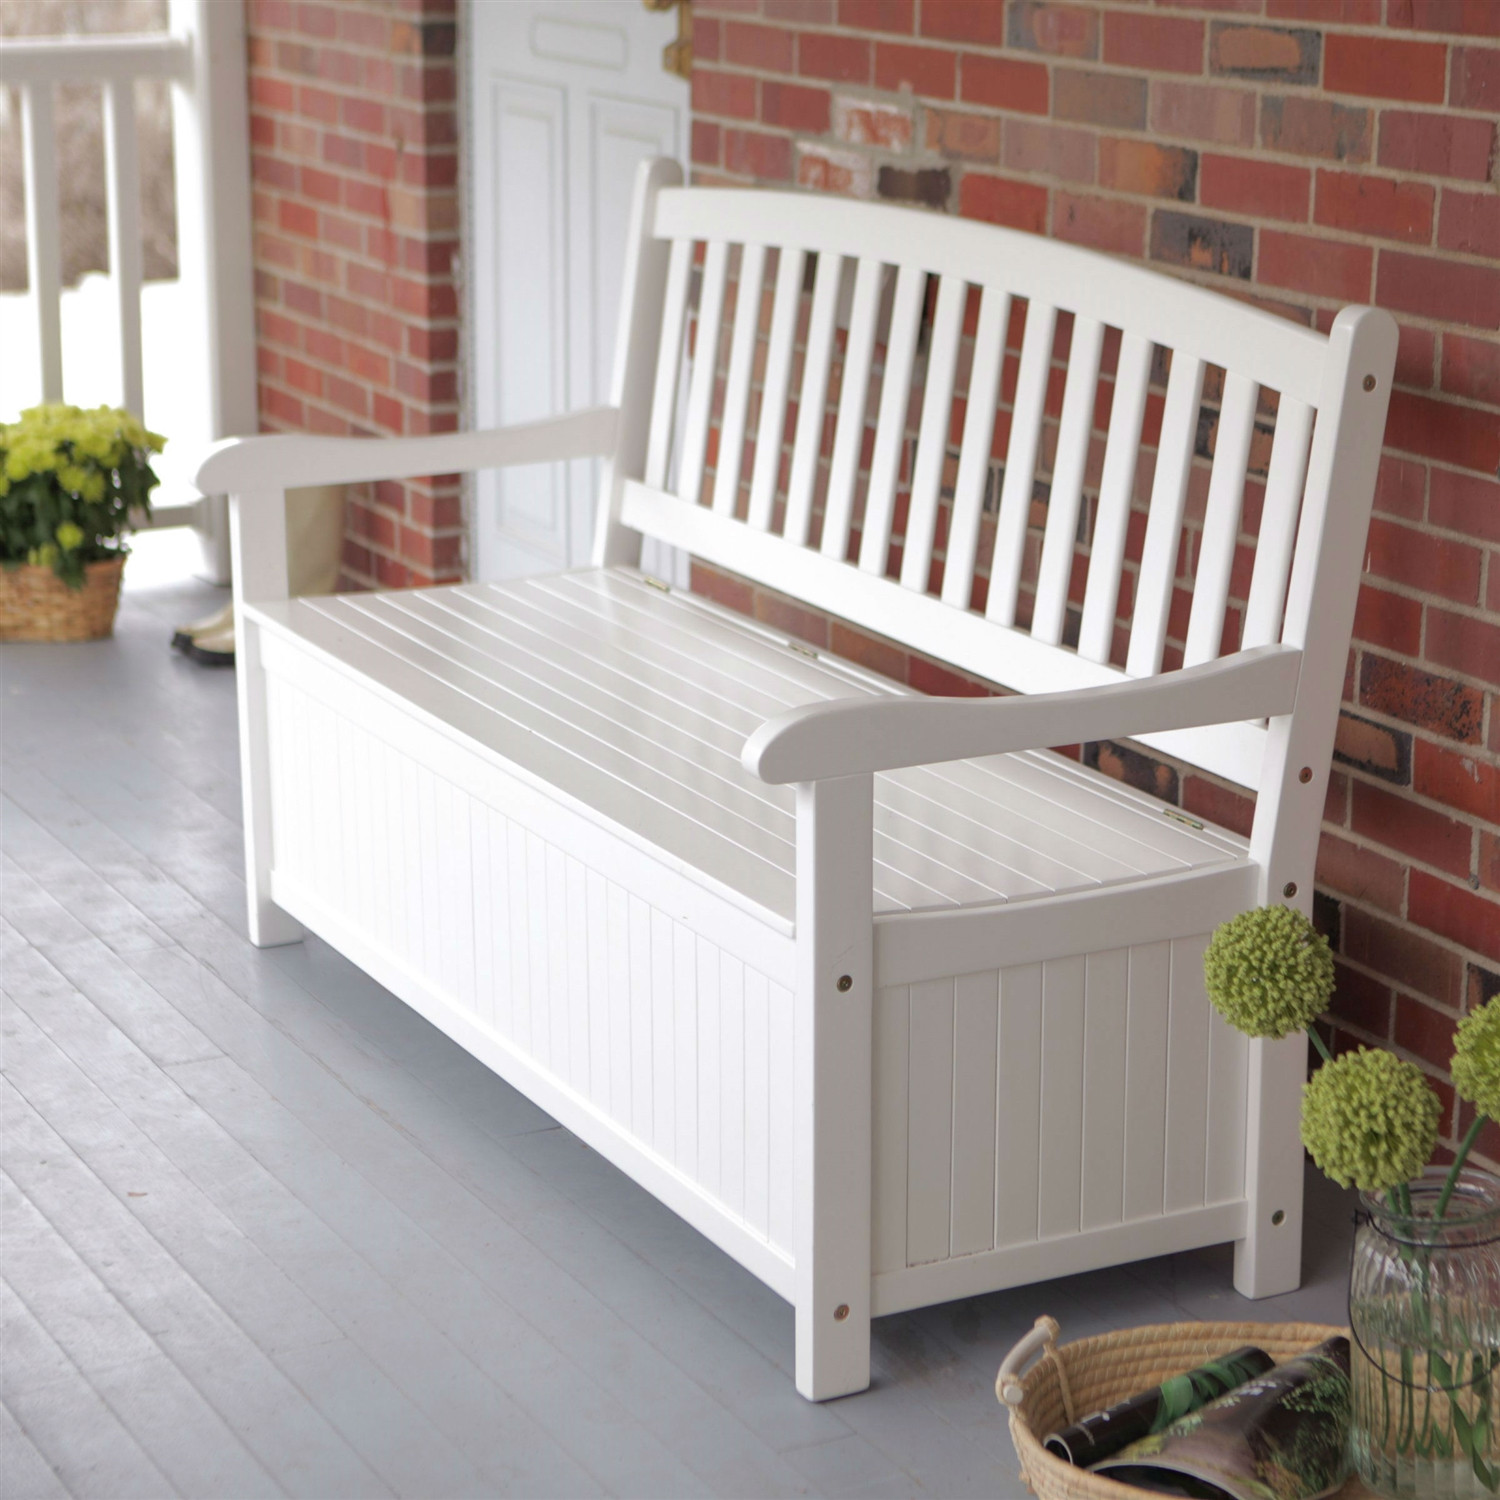 Storage Bench Outside
 White Wood 4 Ft Outdoor Patio Garden Bench Deck Box with